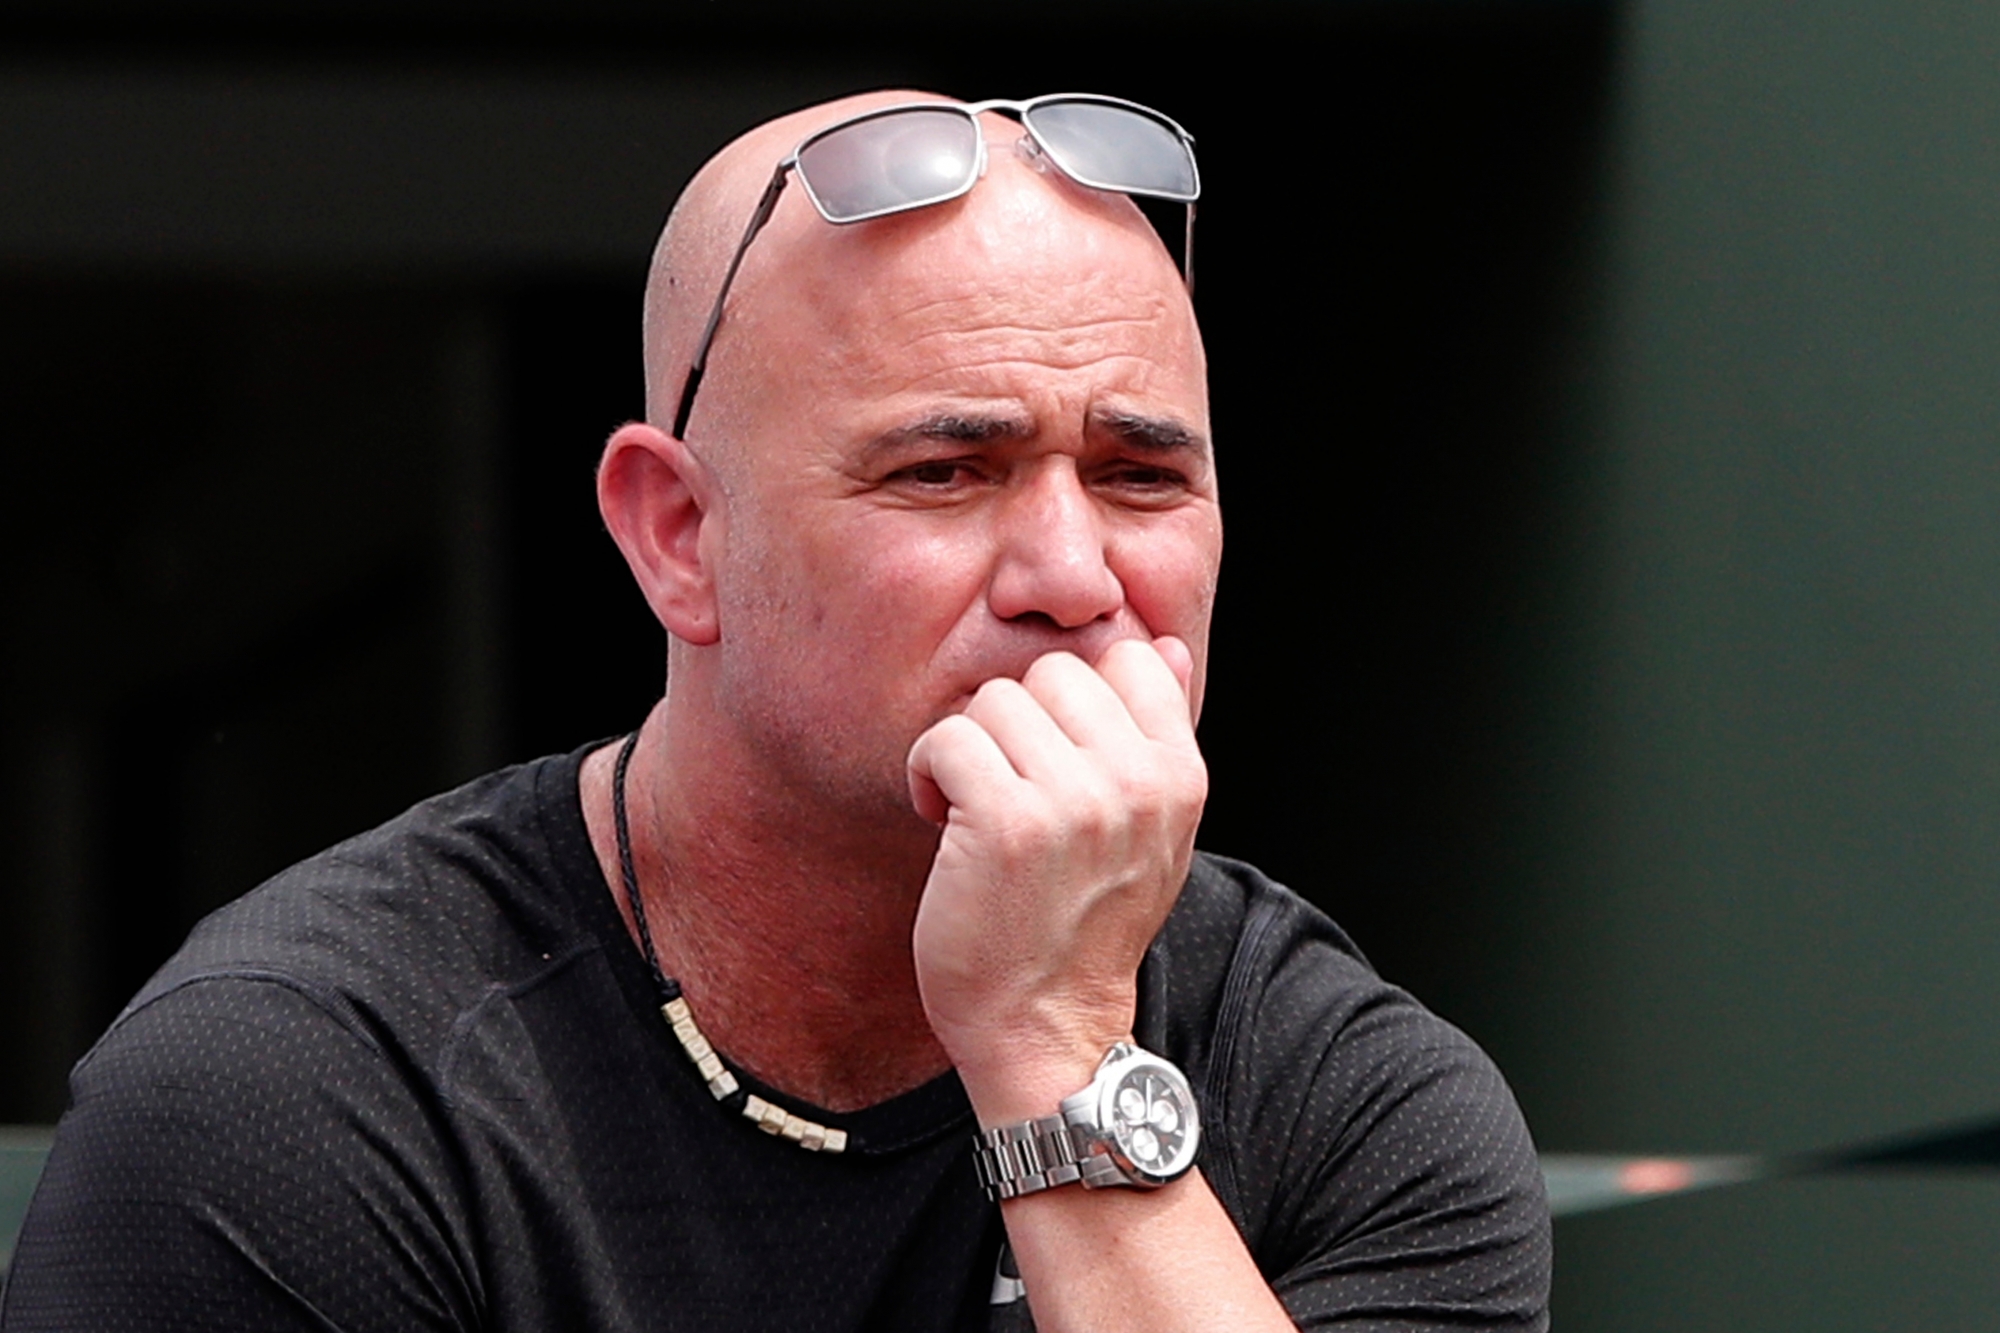 Serbia's Novak Djokovic's coach Andre Agassi of the U.S. watches the match against Spain's Marcel Granollers during their first round match of the French Open tennis tournament at the Roland Garros stadium, in Paris, France. Monday, May 29, 2017. (AP Photo/Christophe Ena) France Tennis French Open